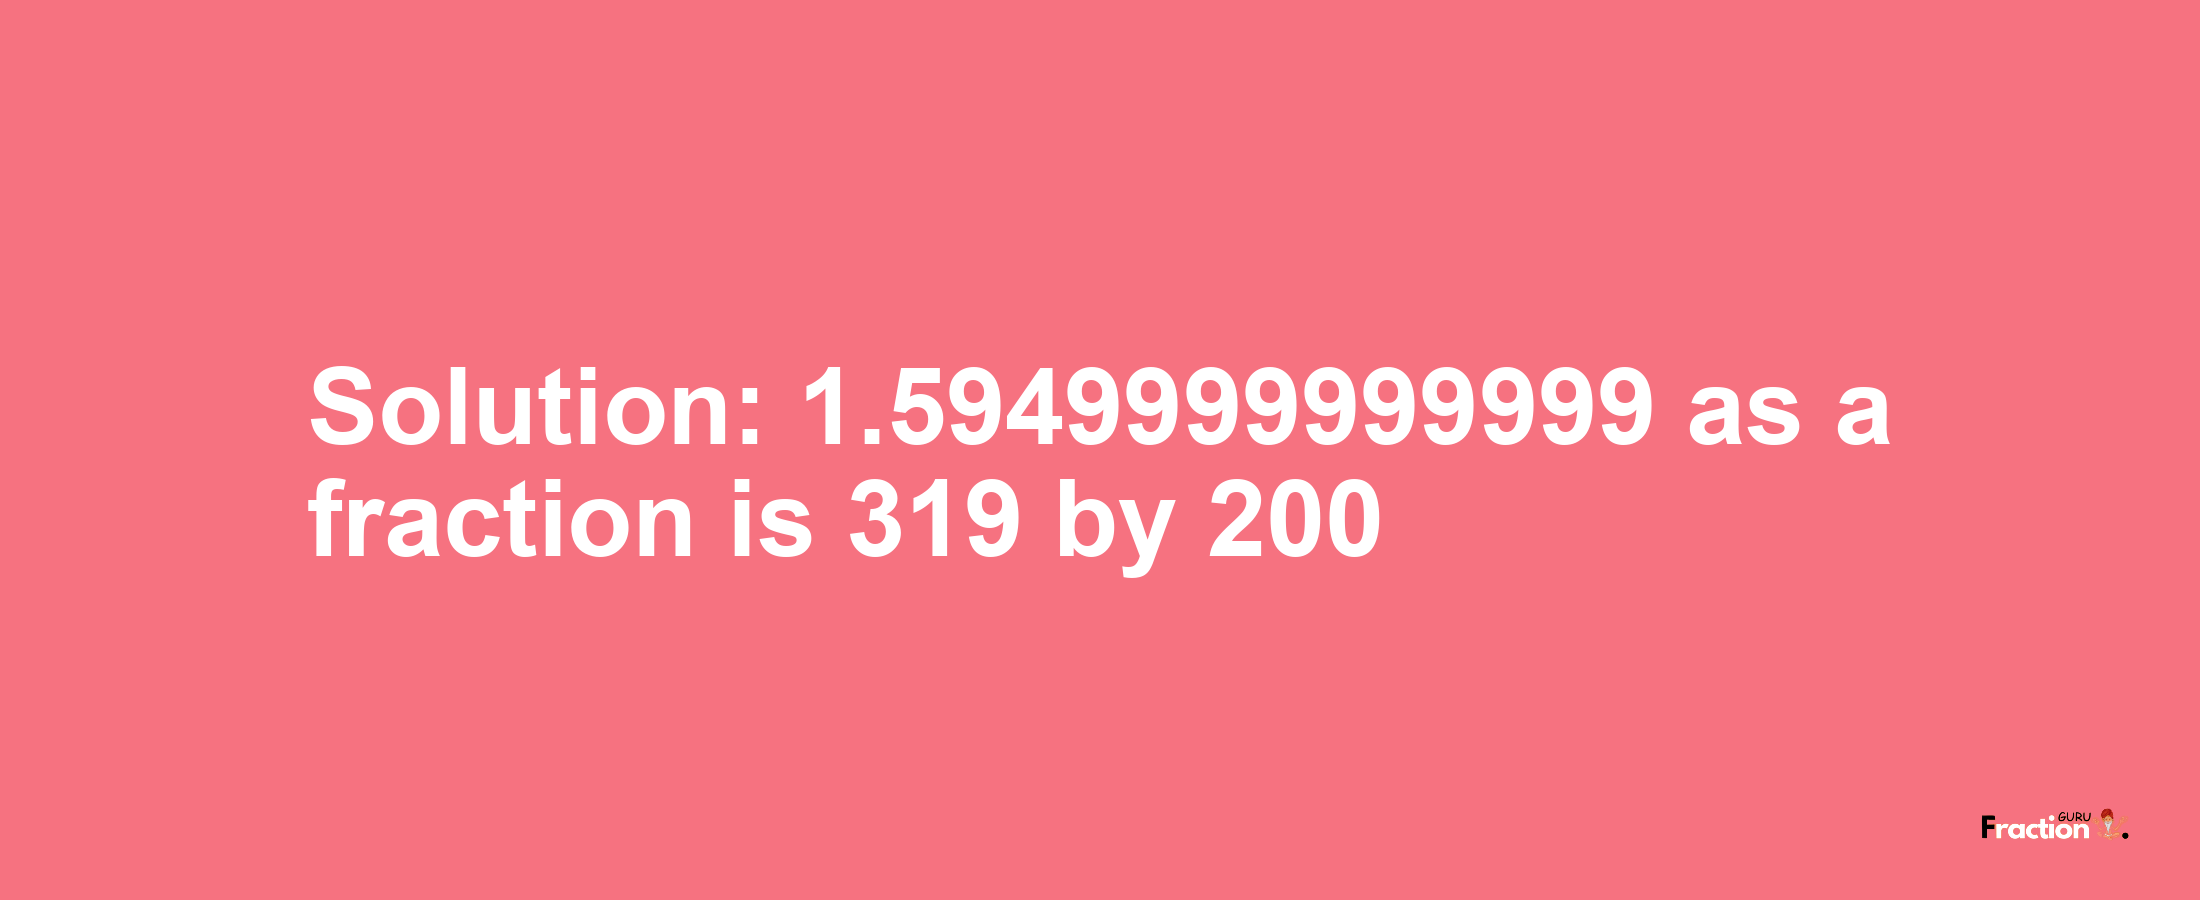 Solution:1.5949999999999 as a fraction is 319/200